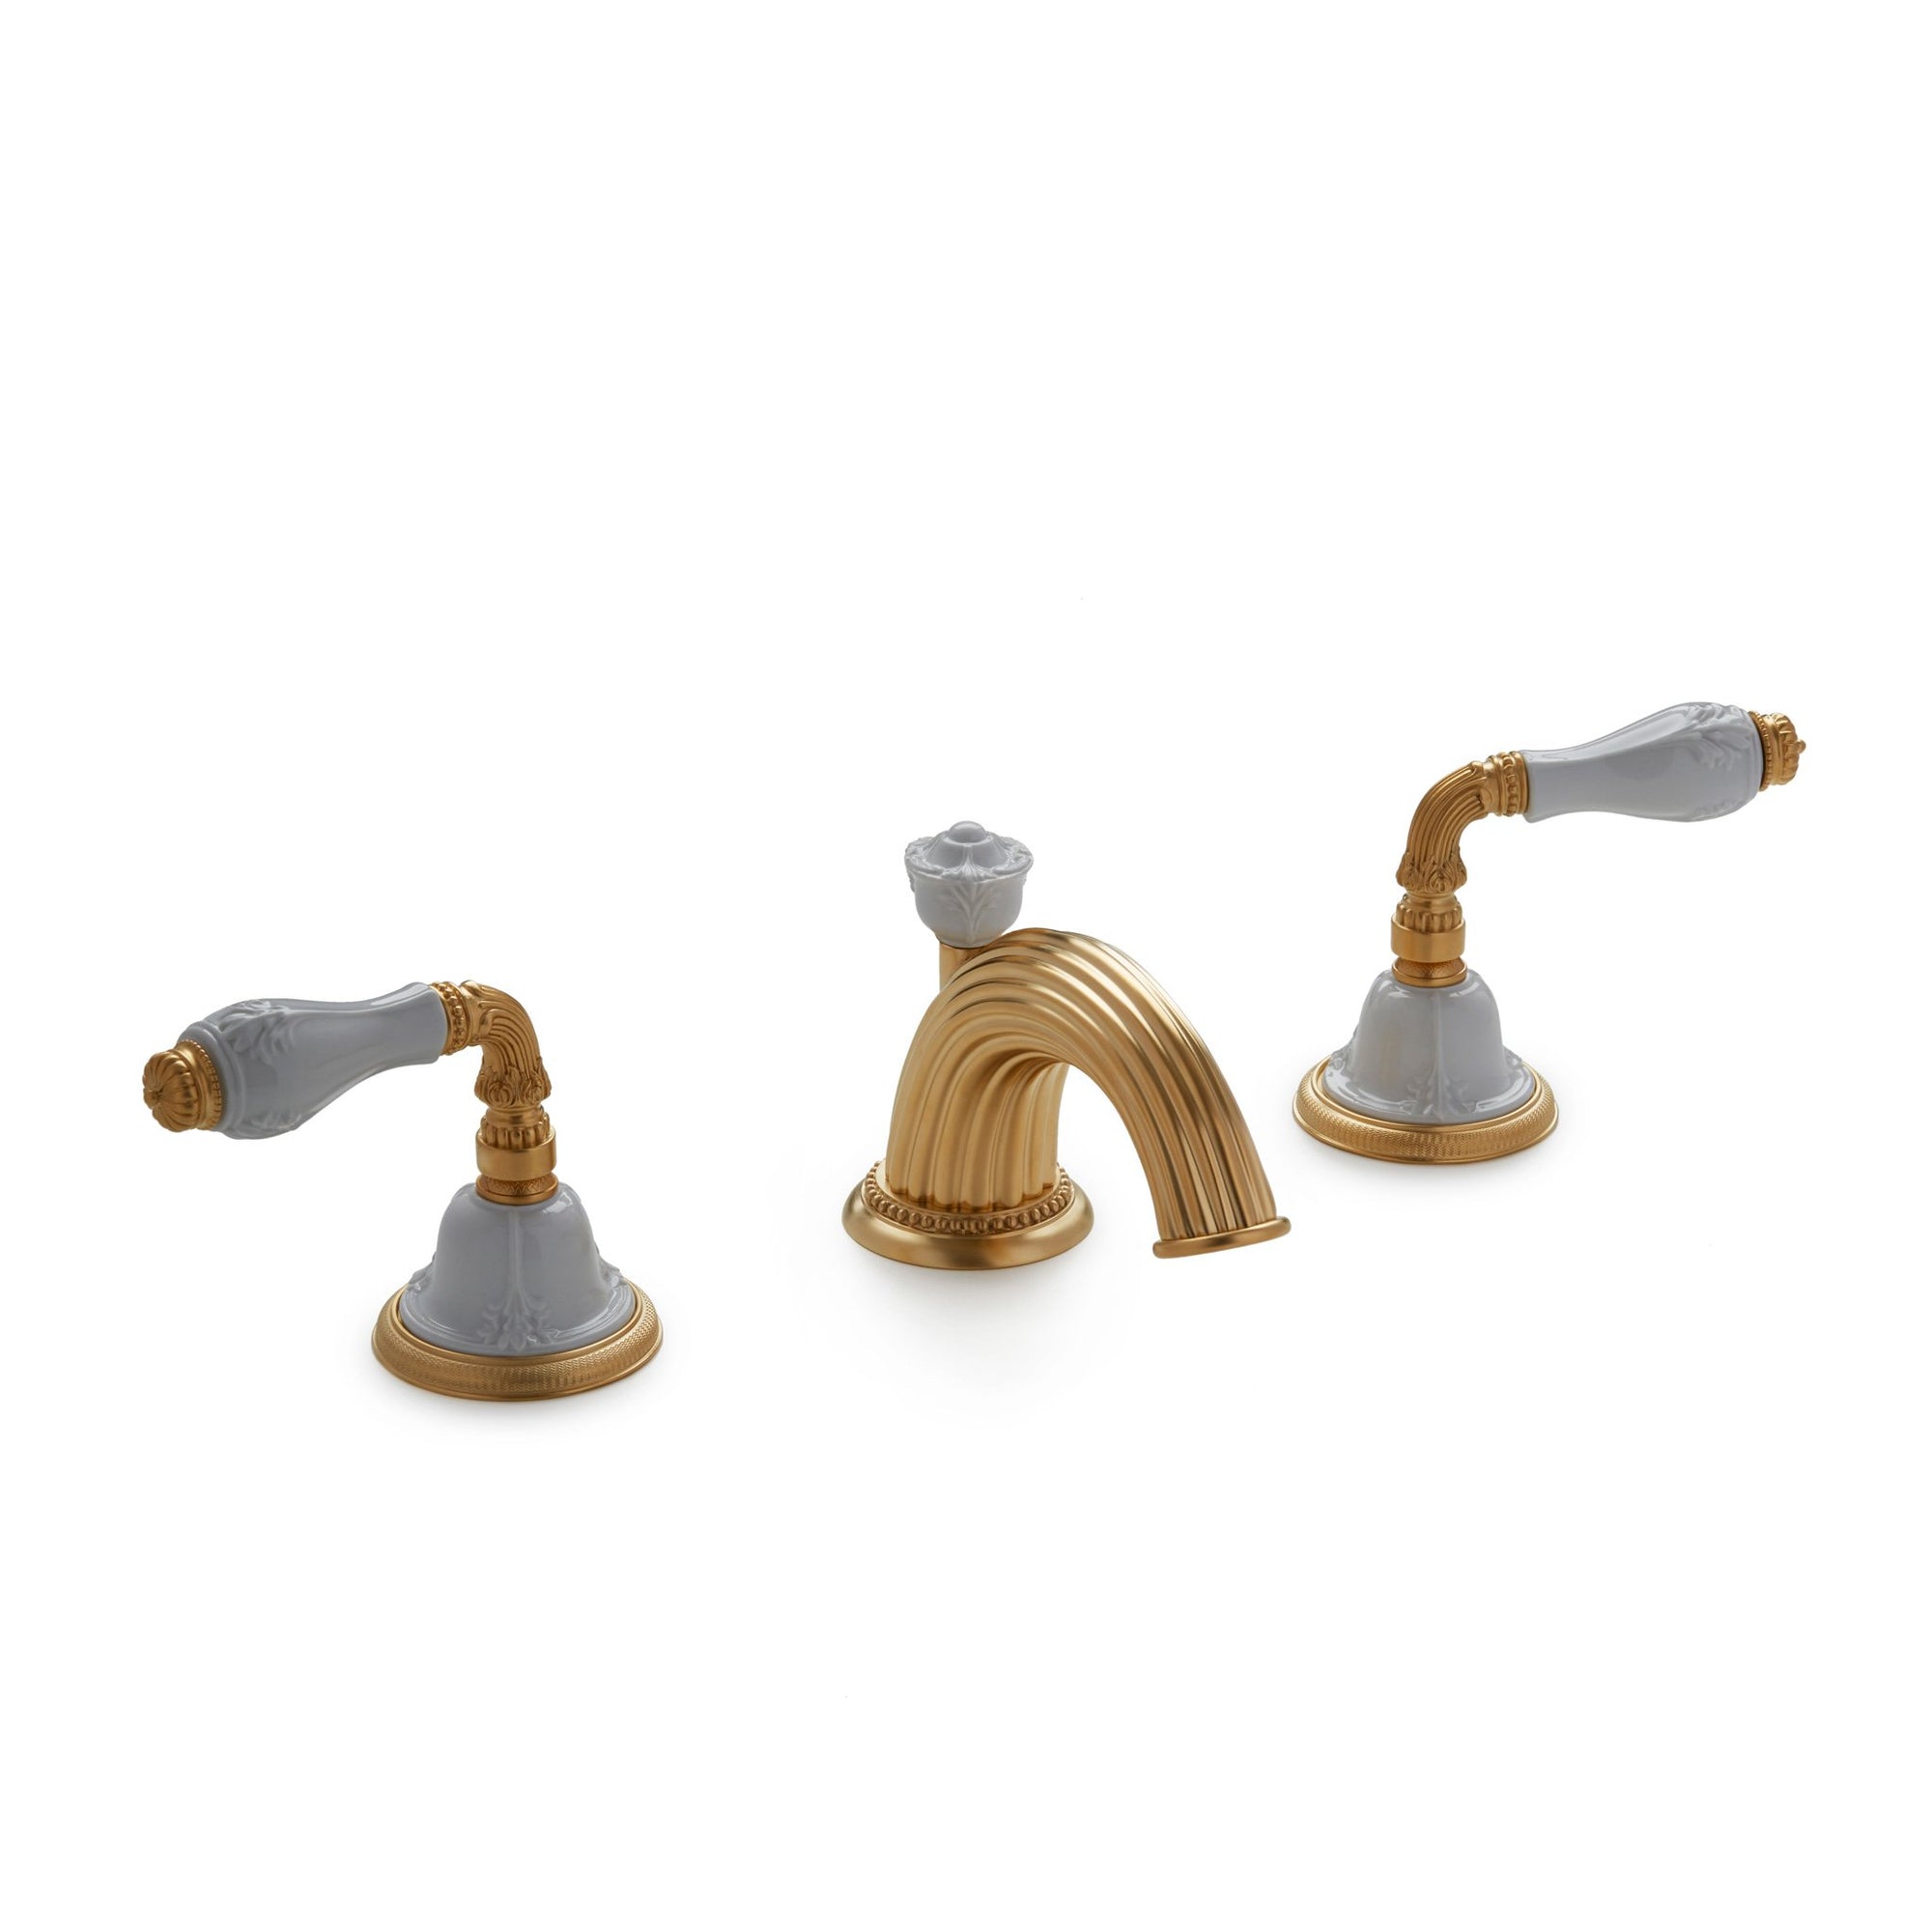 1029BSN813-04WH-GP Sherle Wagner International Provence Ceramic Fluted Lever Faucet Set in Gold Plate metal finish with White Glaze inserts